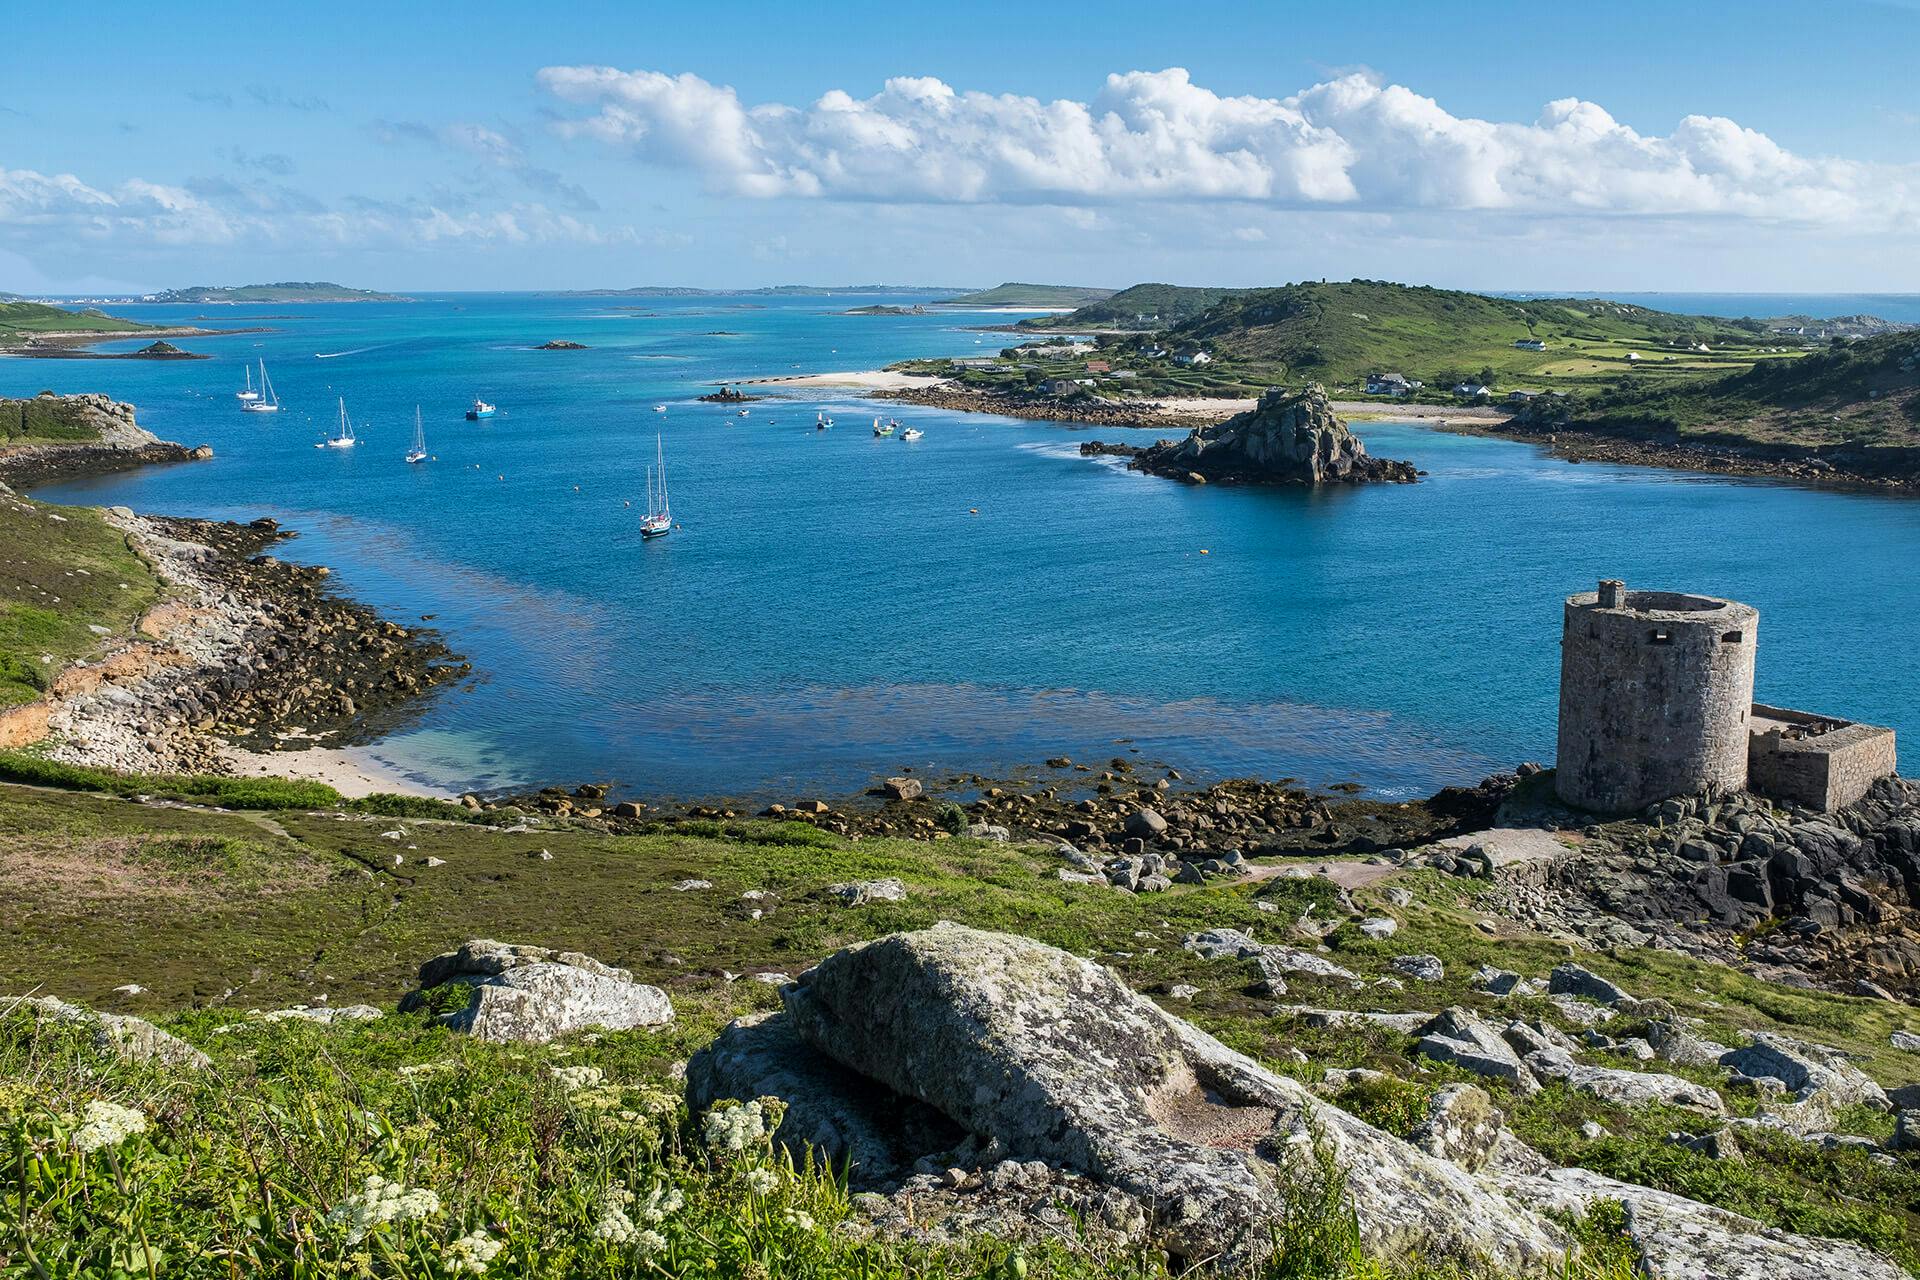 A view of Bryher from Tresco on the Isles of Scilly, with Cromwell's Castle in the foreground